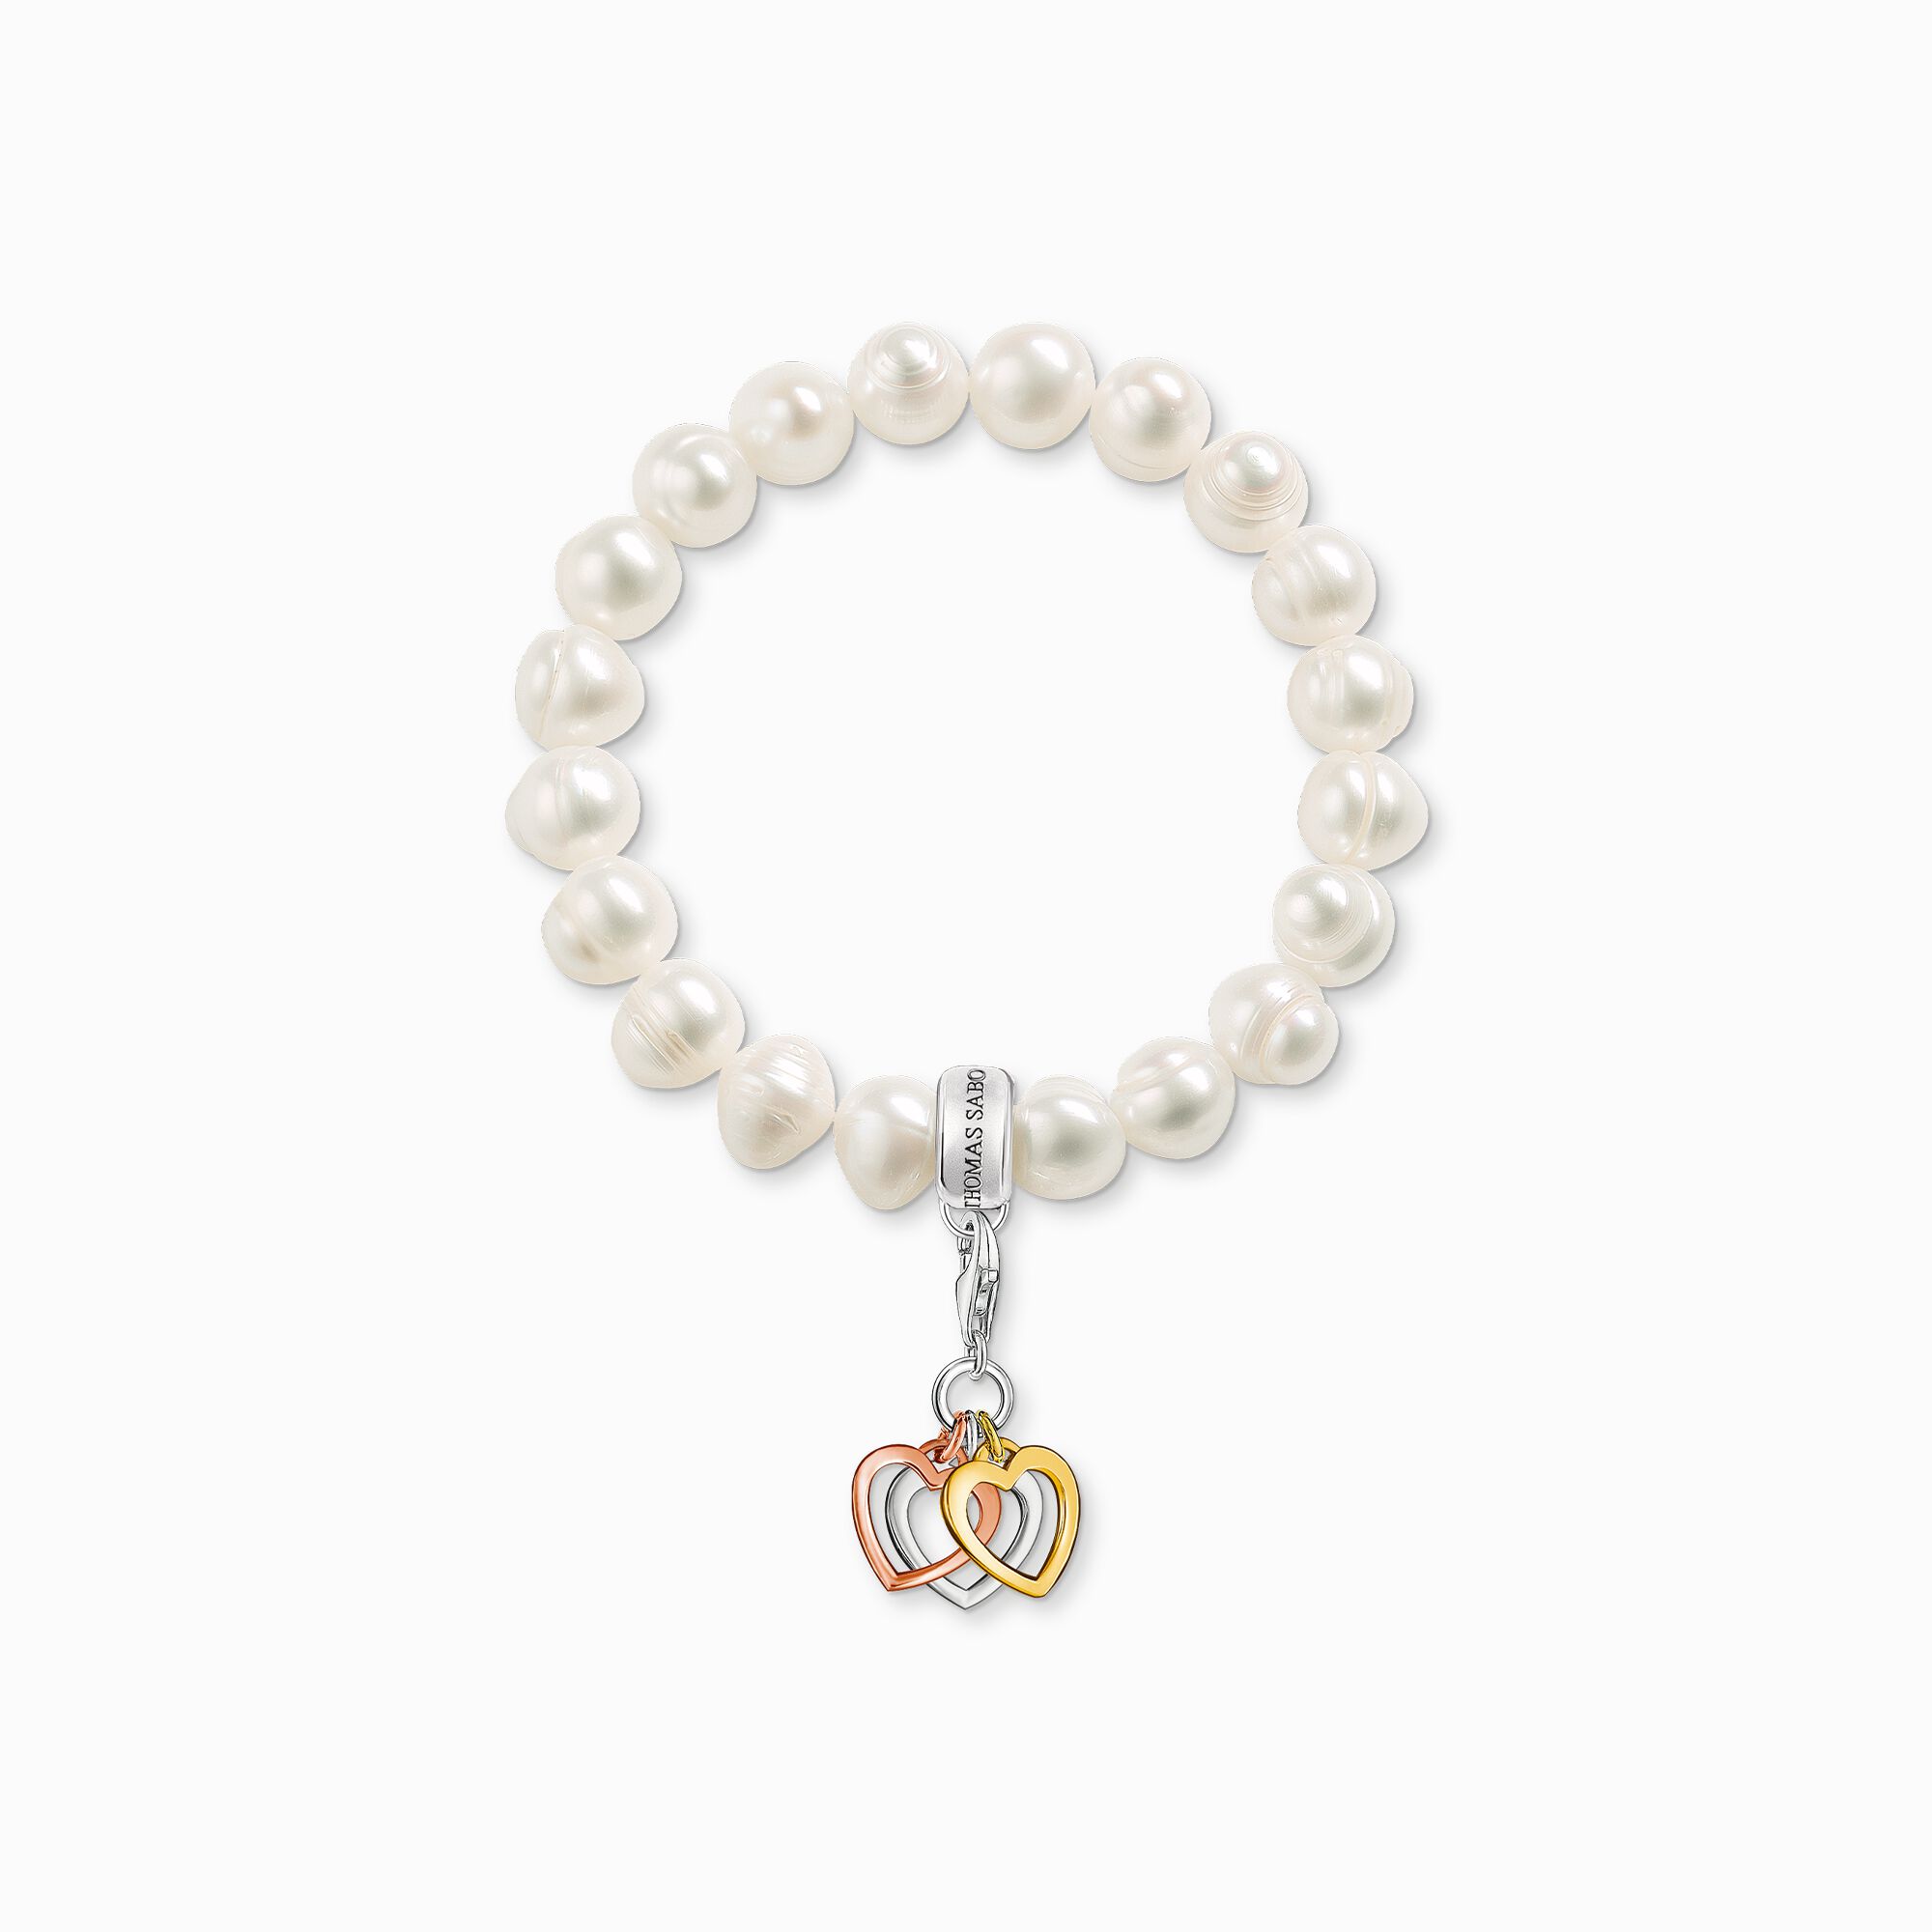 Charm bracelet hearts from the Charm Club collection in the THOMAS SABO online store